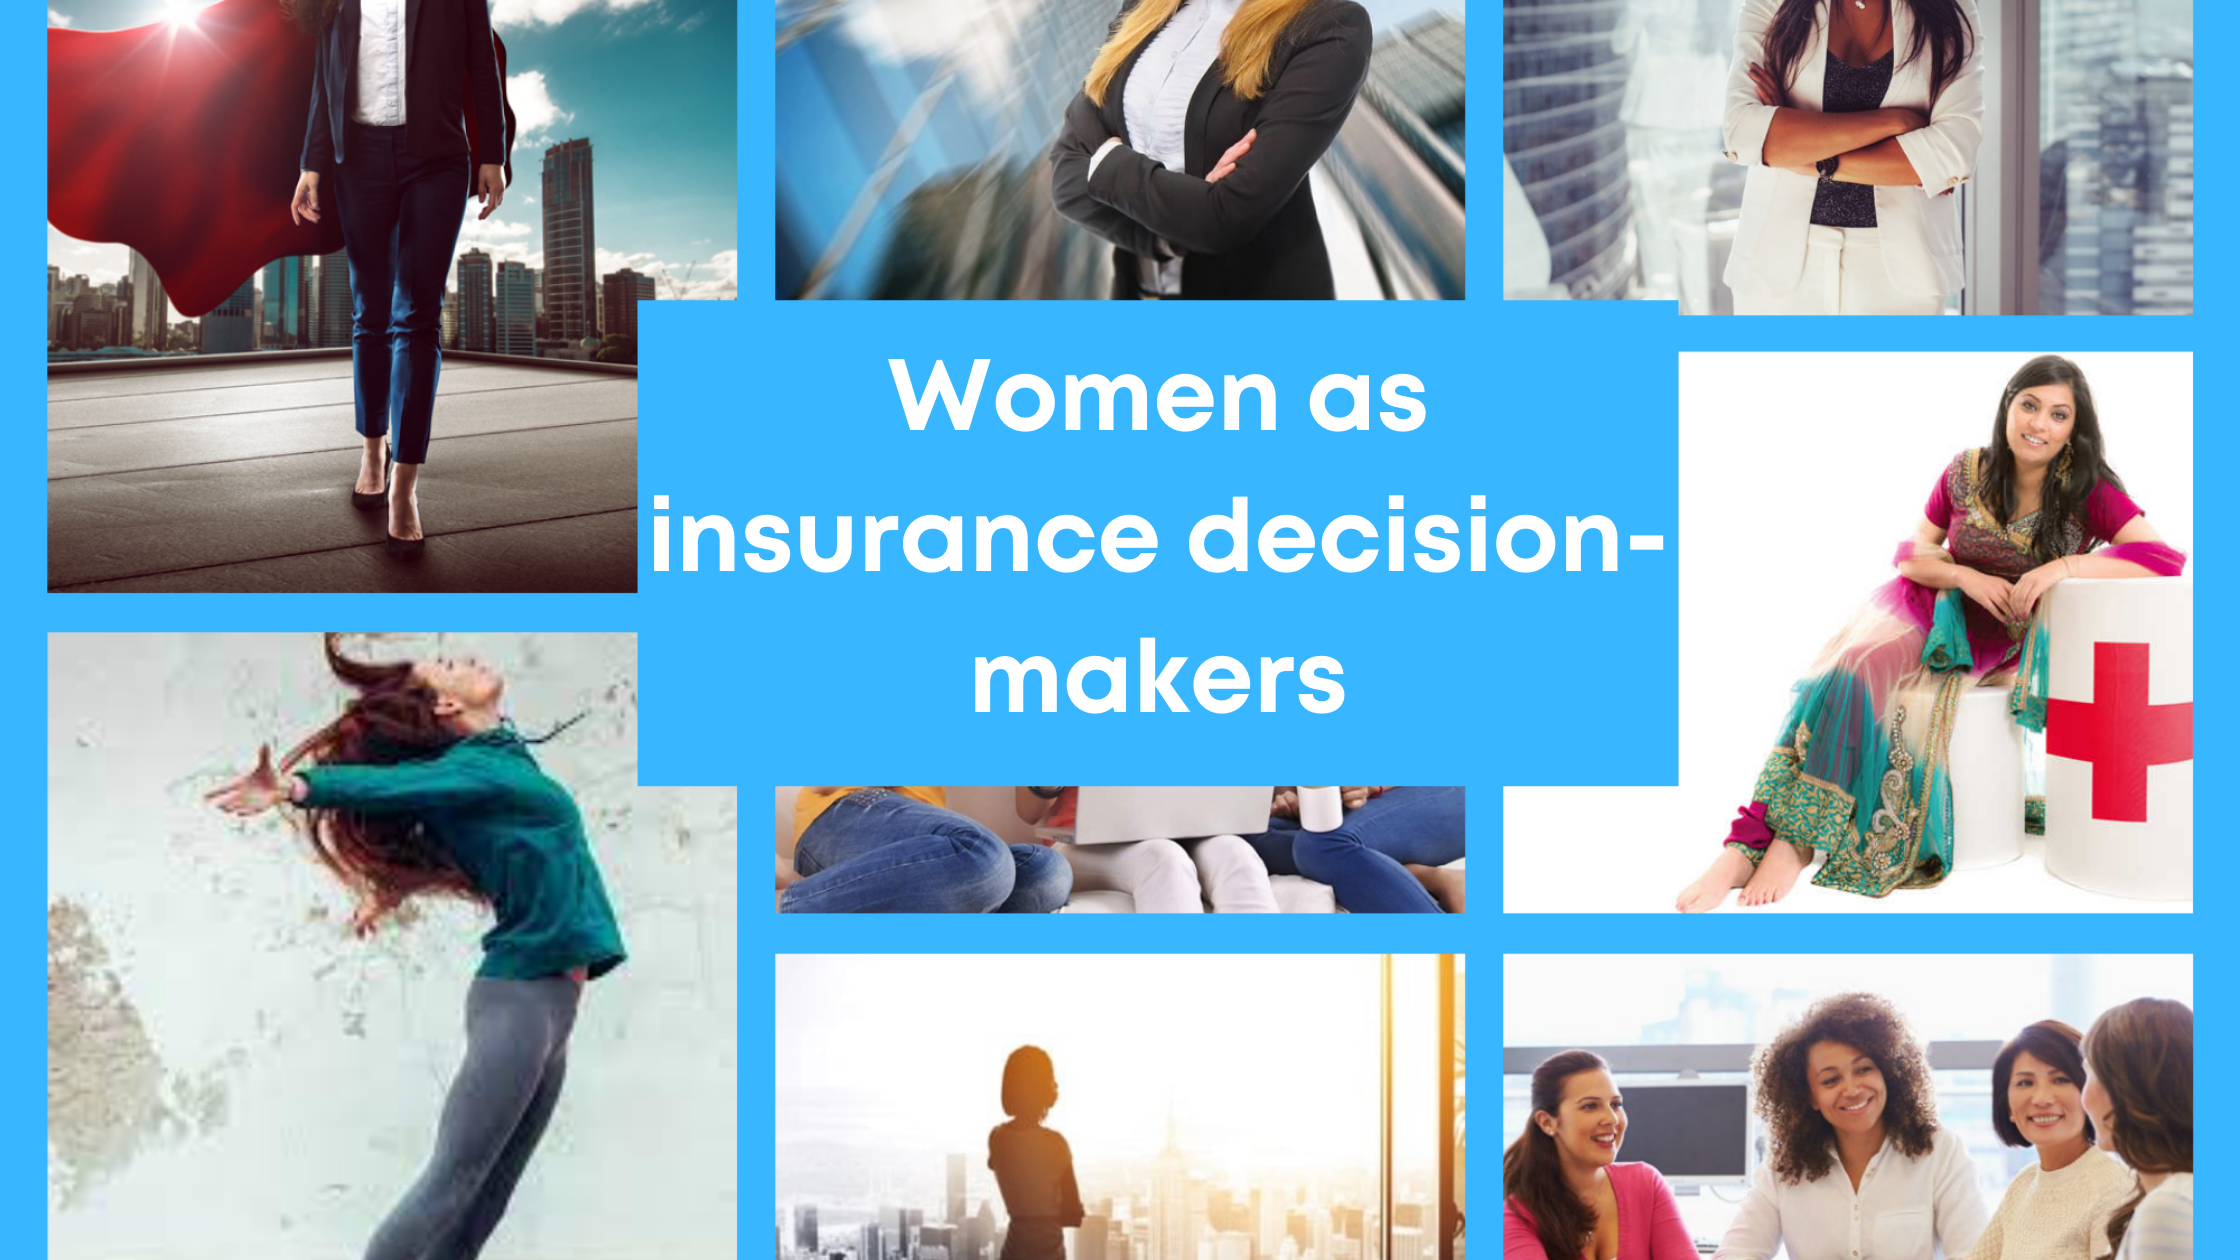 Women as insurance decision-makers